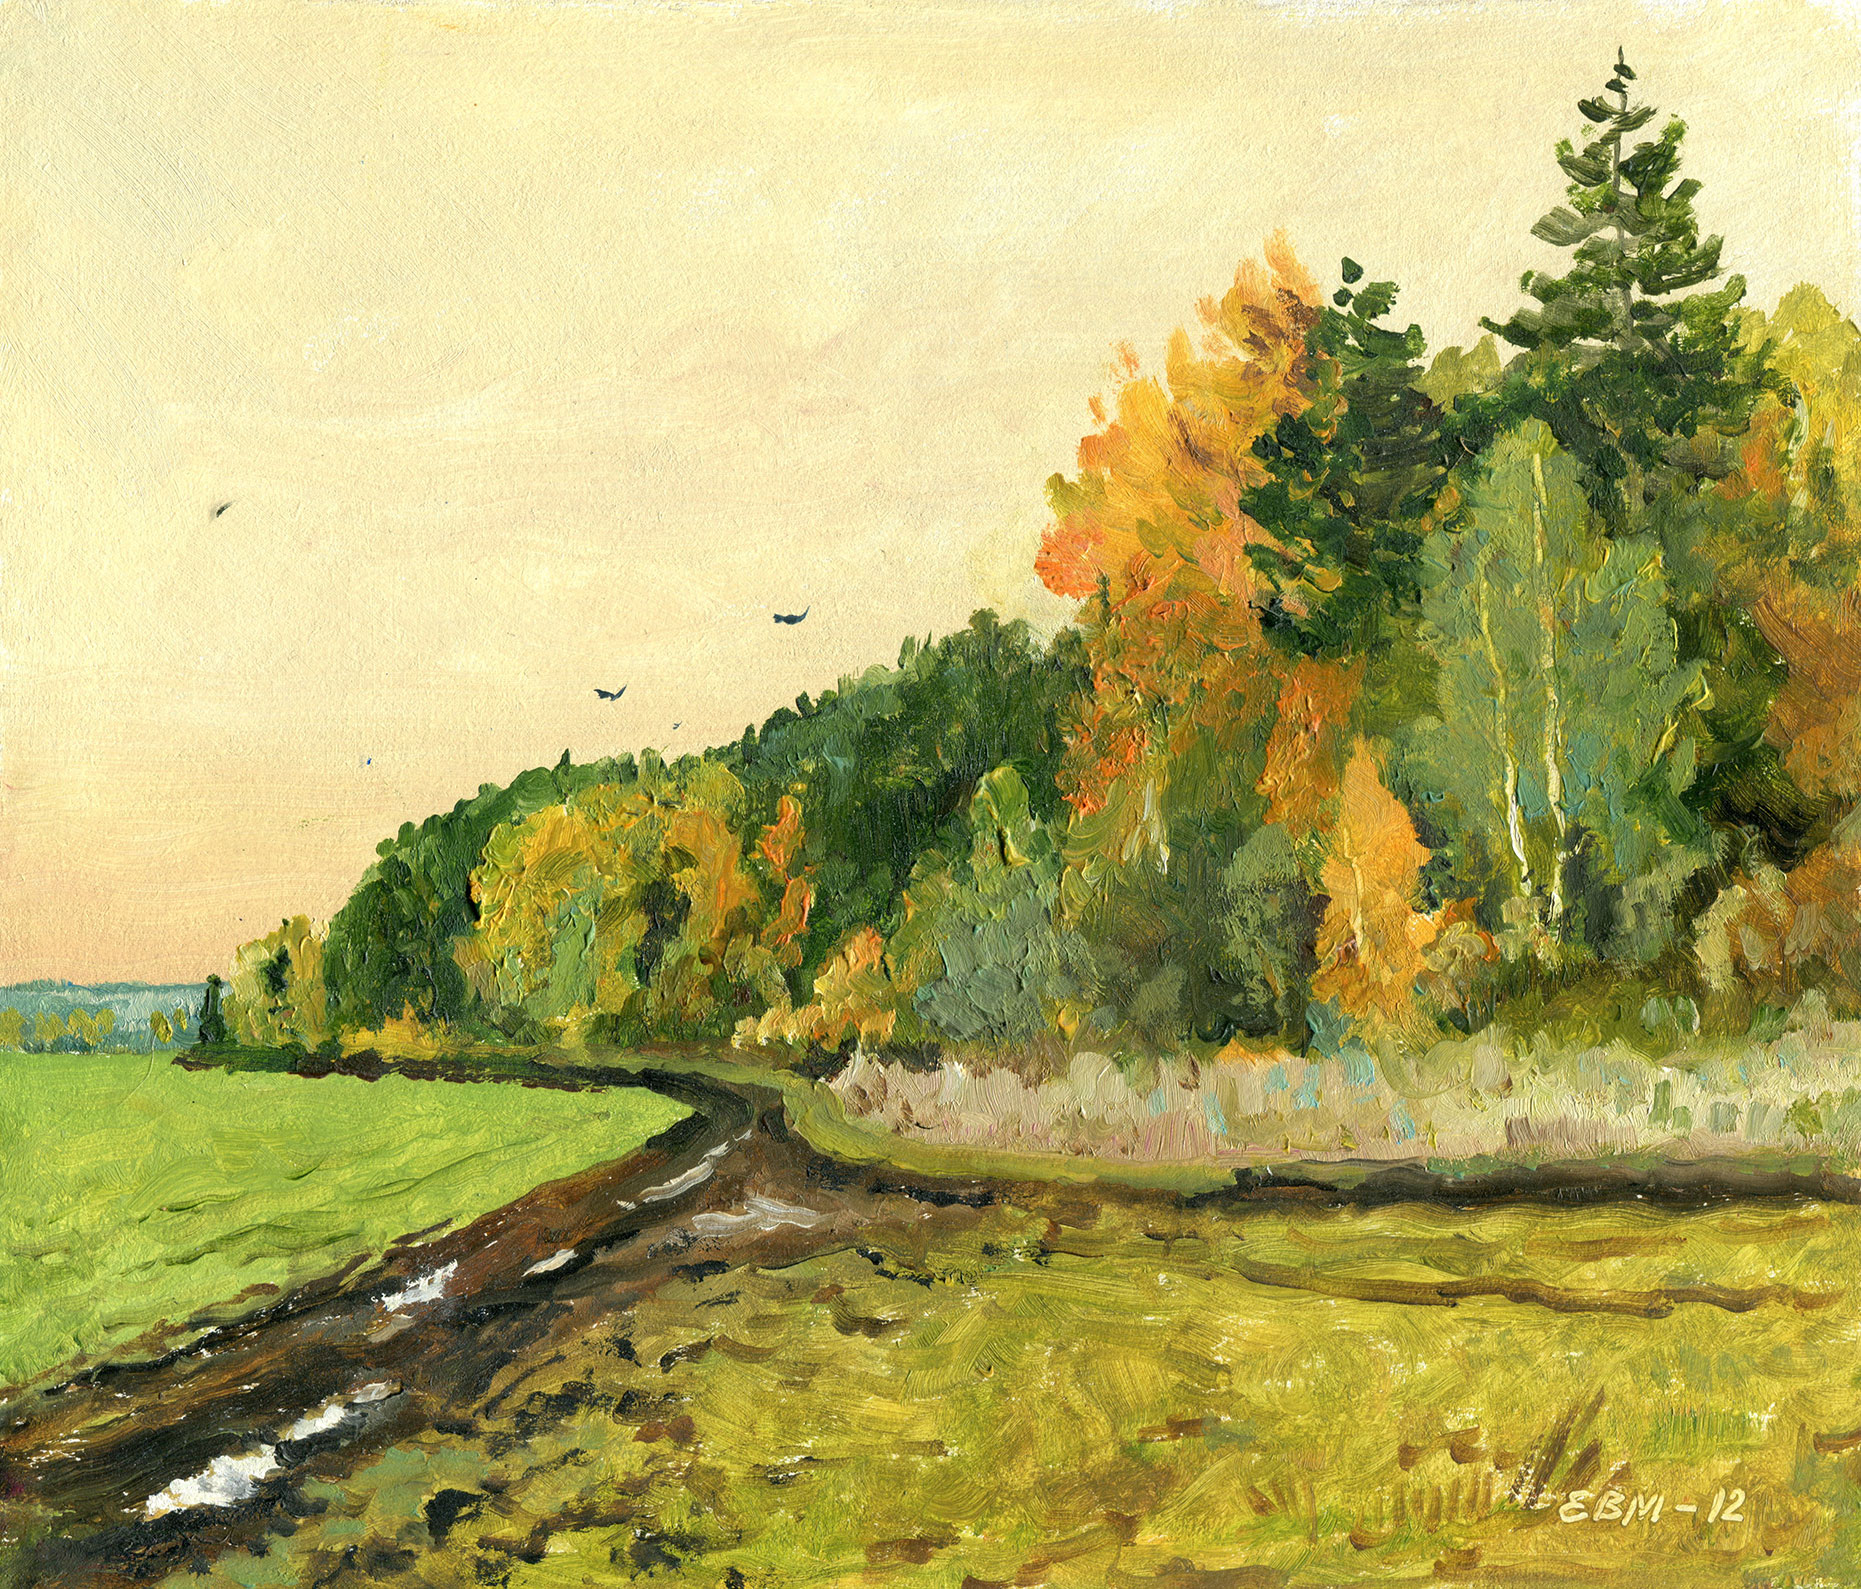 The Autumn Has Come - 1, Valentin Efremov, Buy the painting Oil